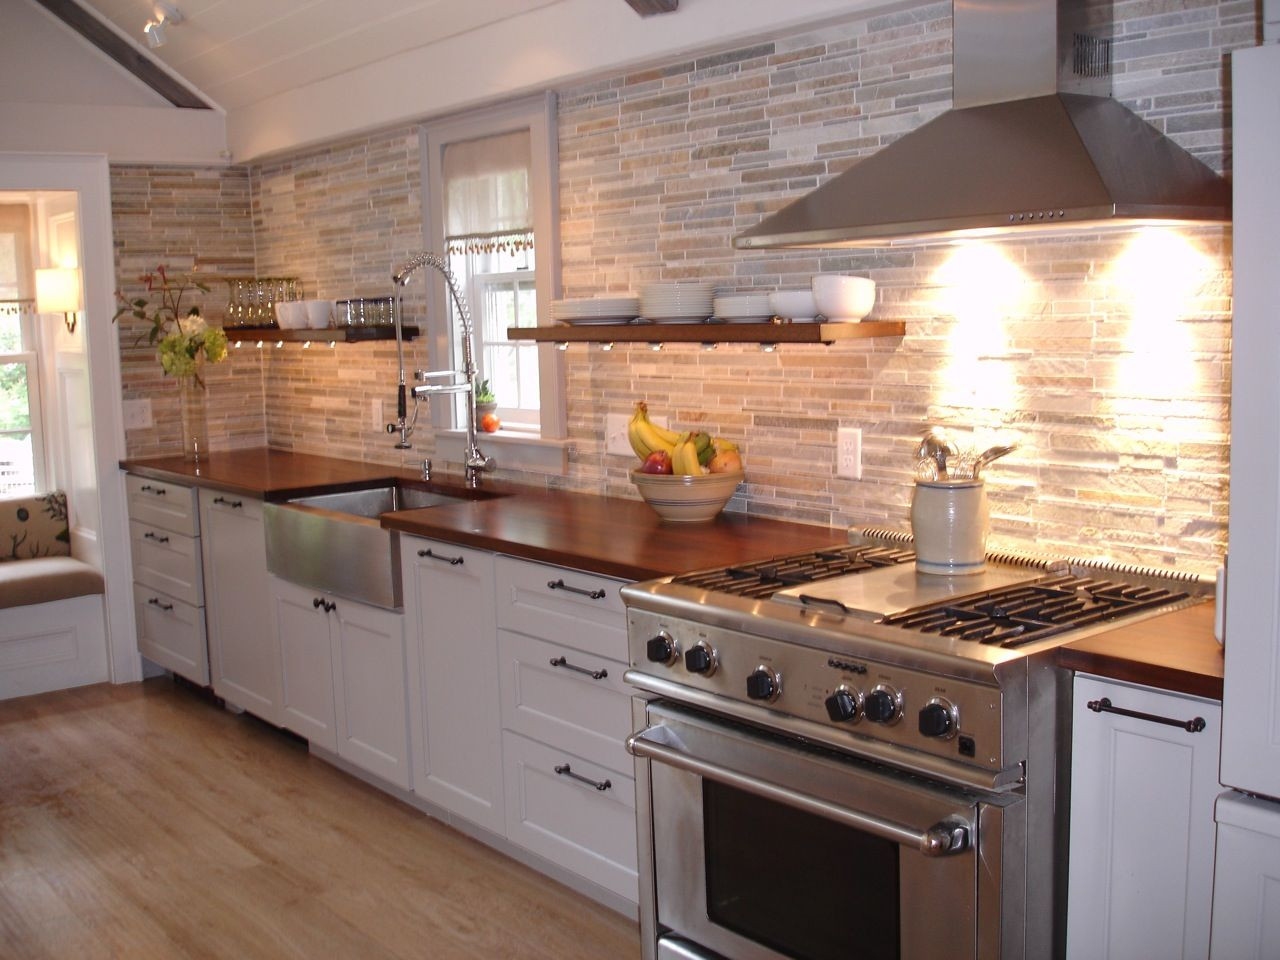 Wood Kitchen Counters
 How To Choose A Wood Countertop For Your Kitchen